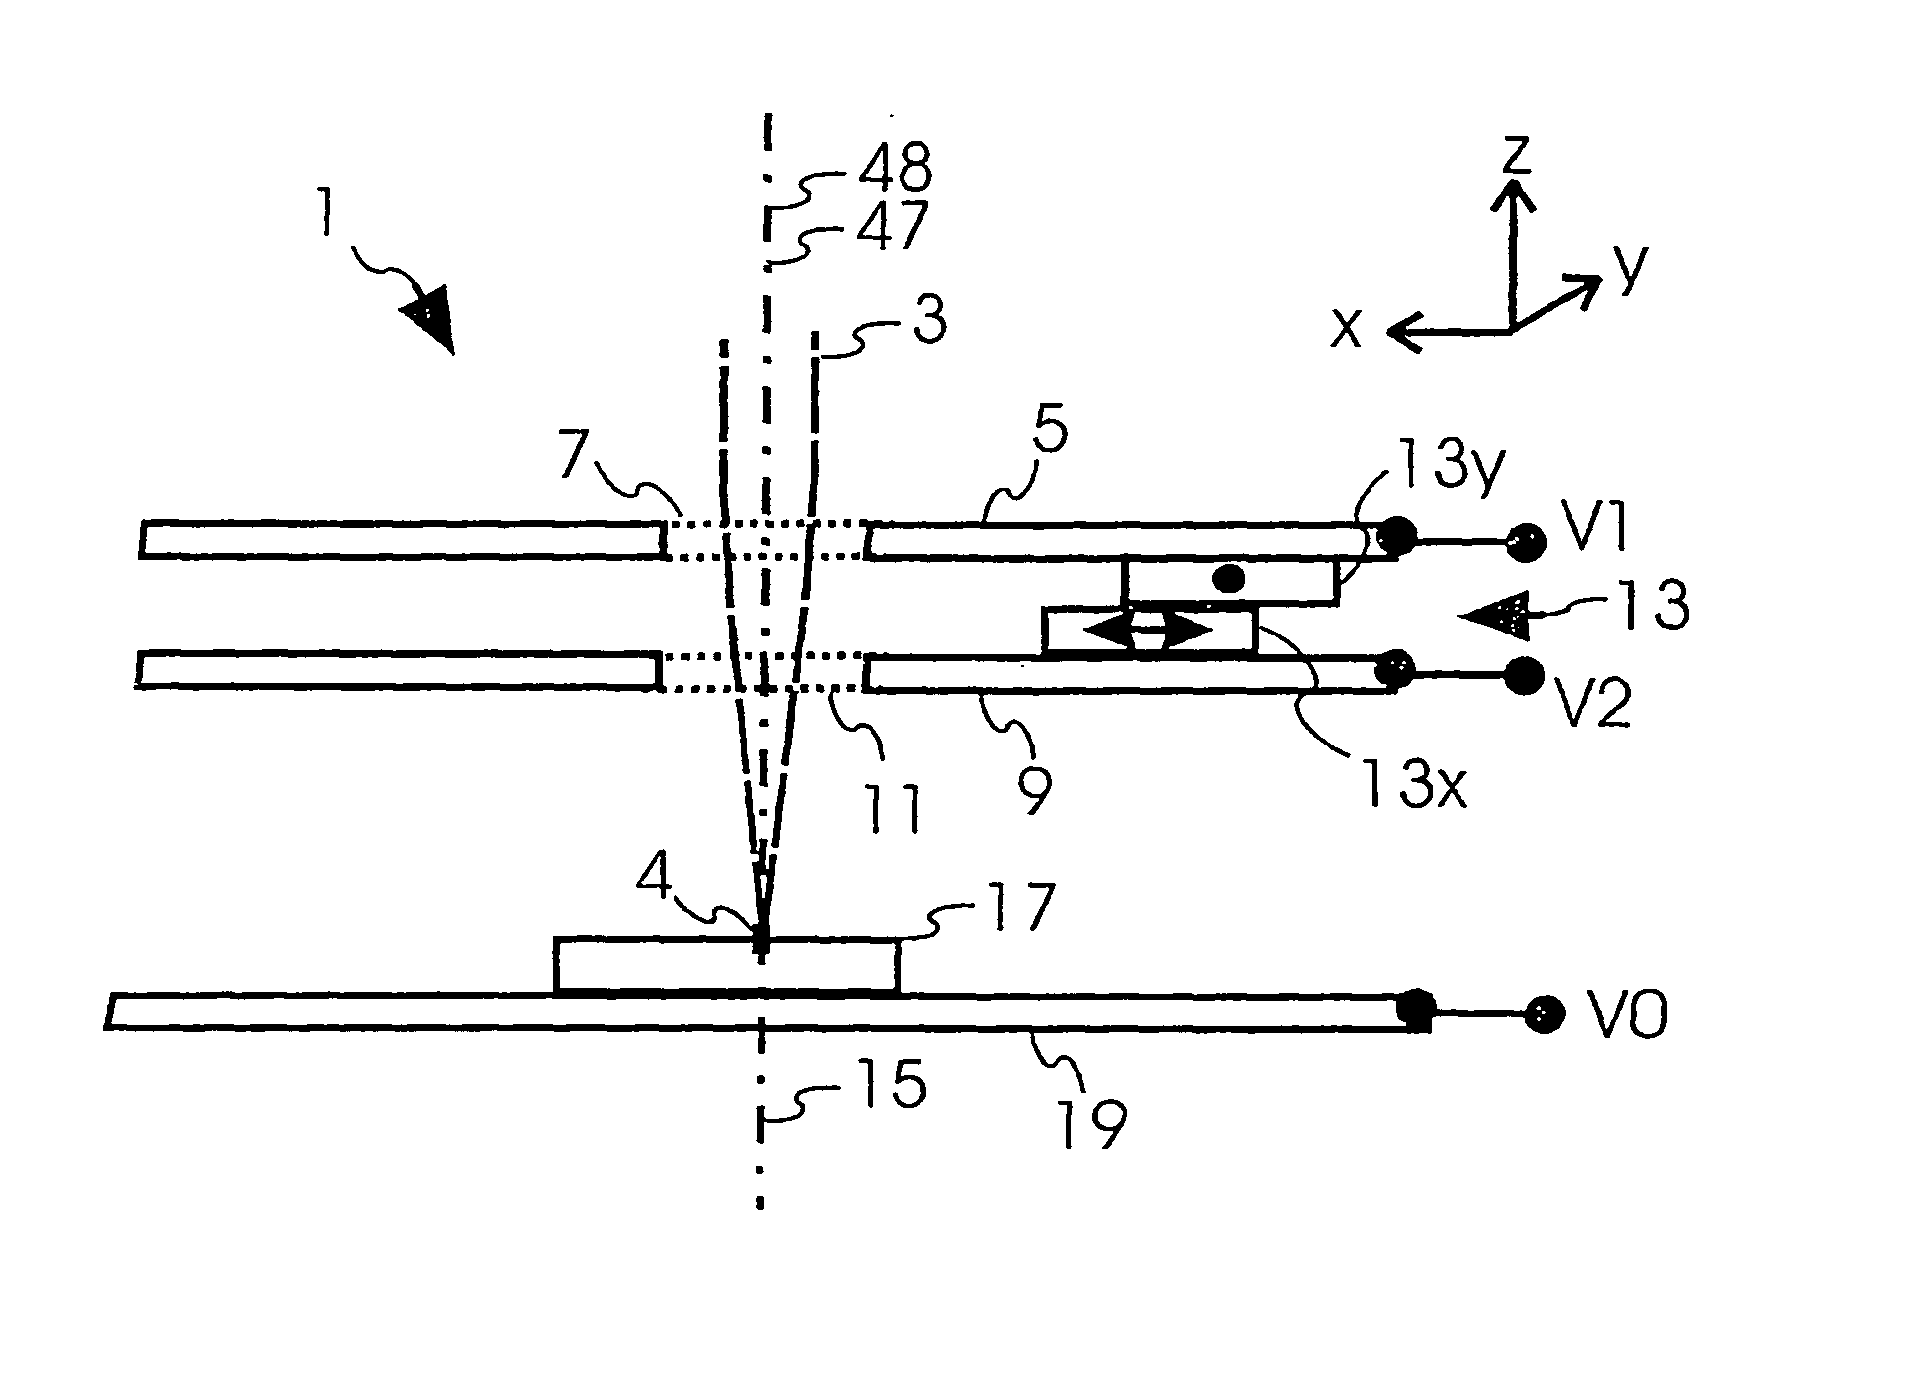 Beam Optical Component Having a Charged Particle Lens